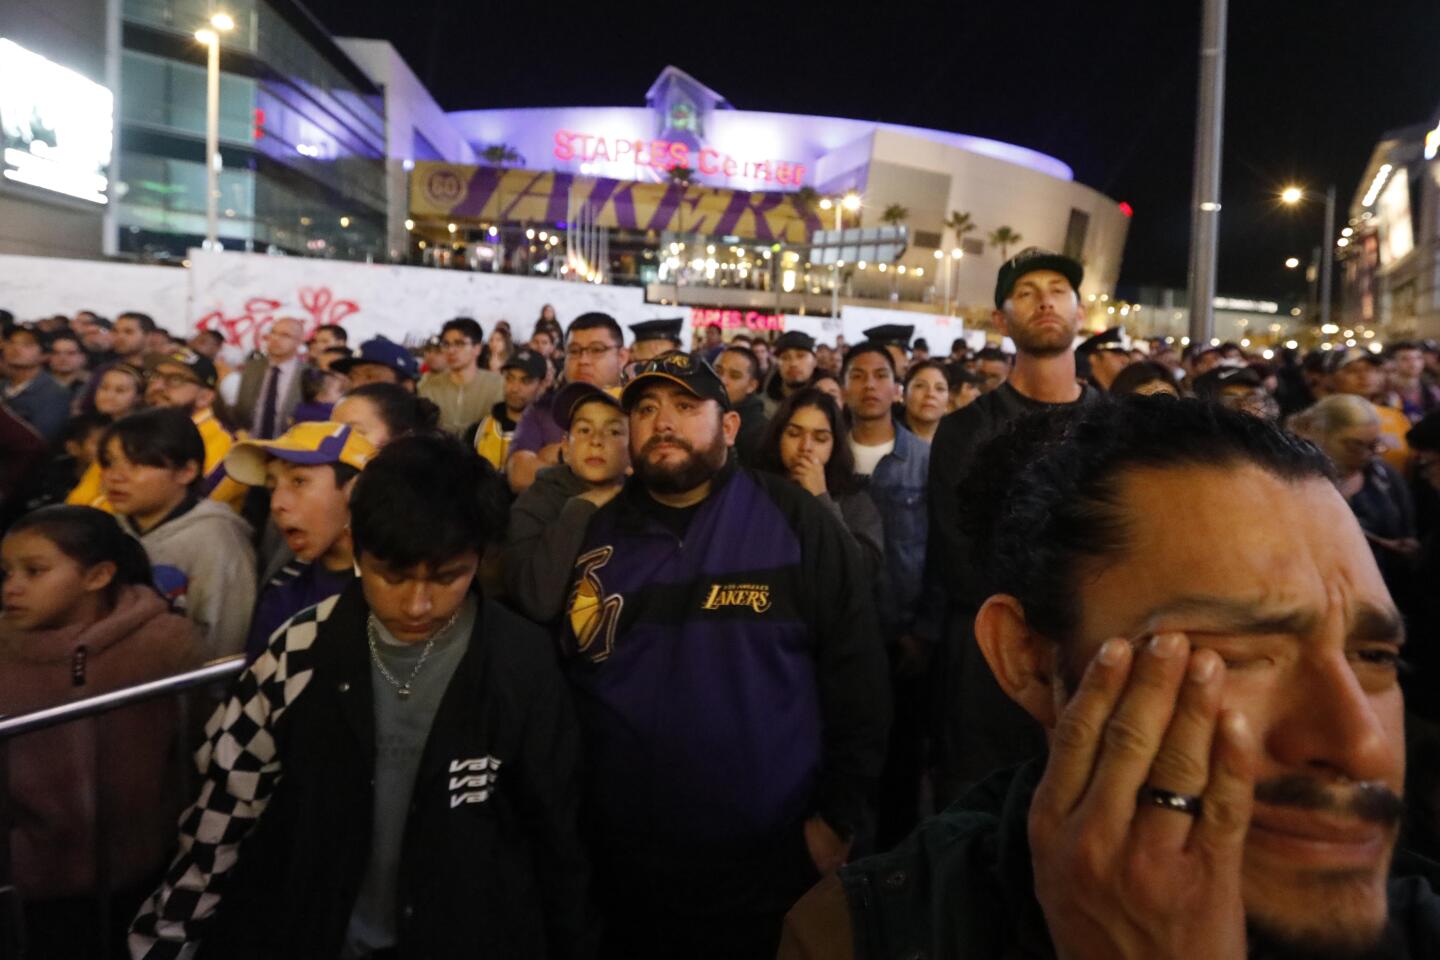 Joseph Hernandez, right, wipes a tear while watching a pregame tribute to Kobe Bryant with hundreds of fans standing outside Staples Center on Jan. 31, 2020.